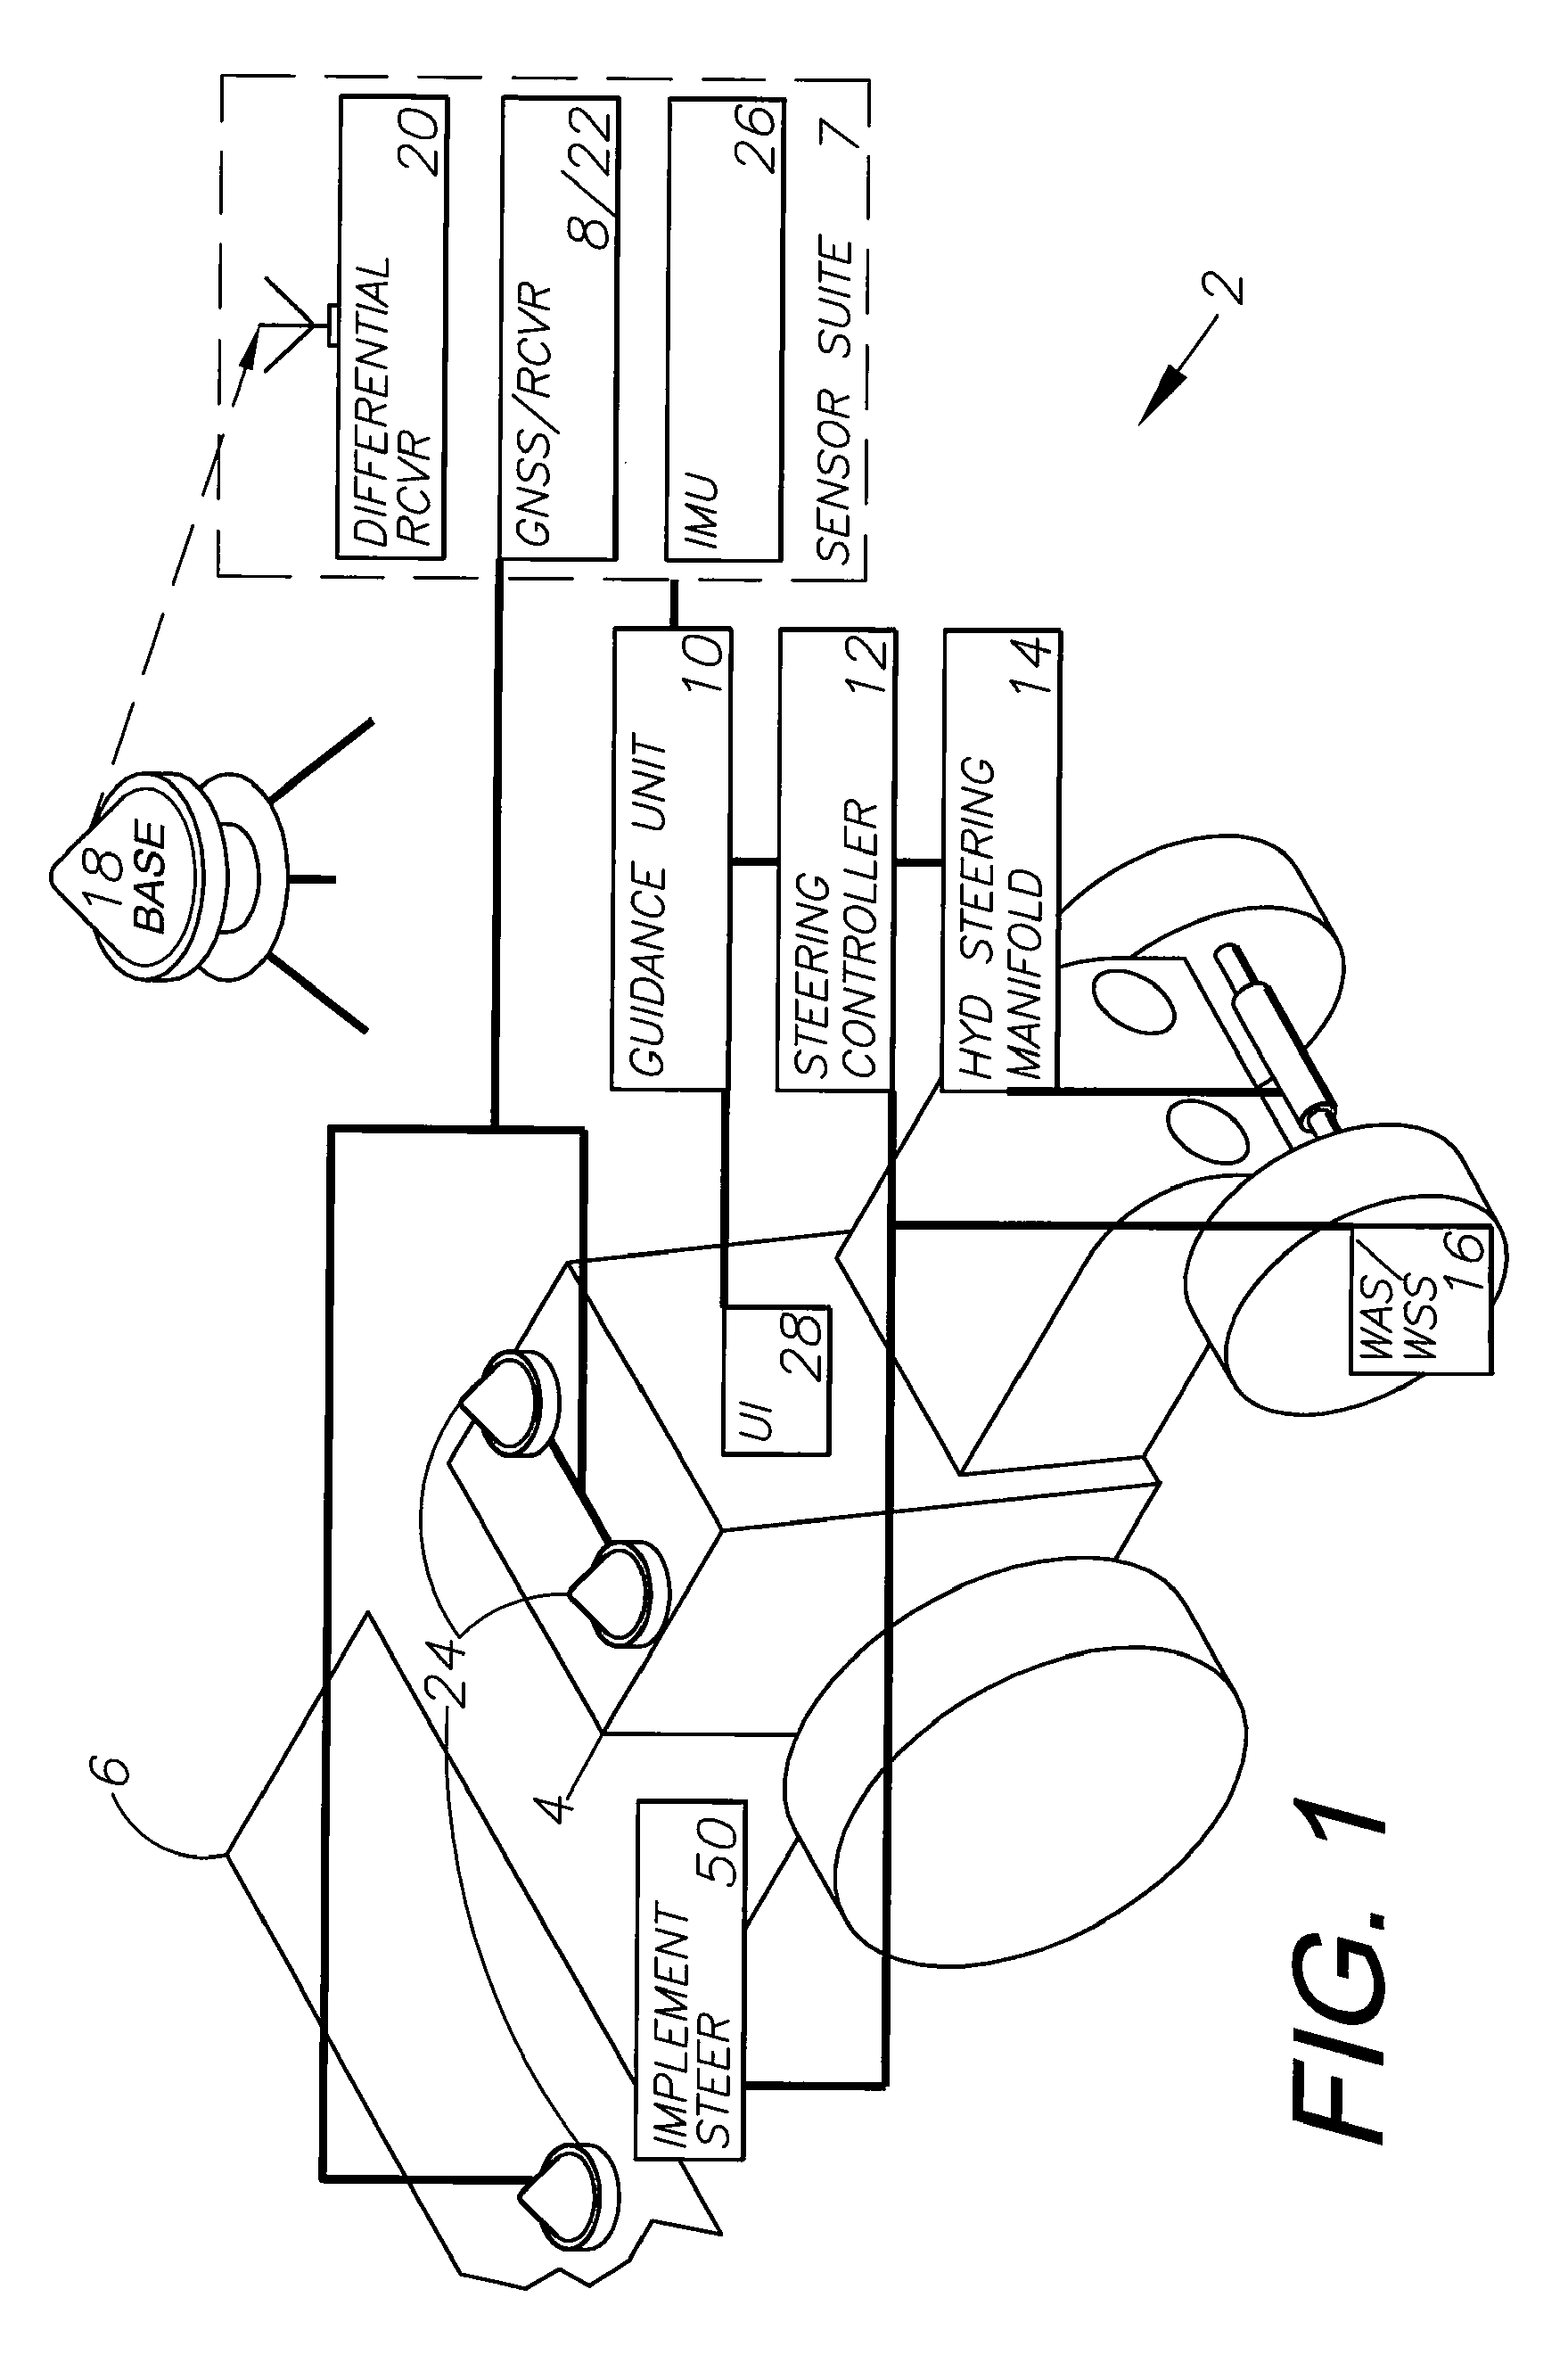 GNSS integrated multi-sensor control system and method